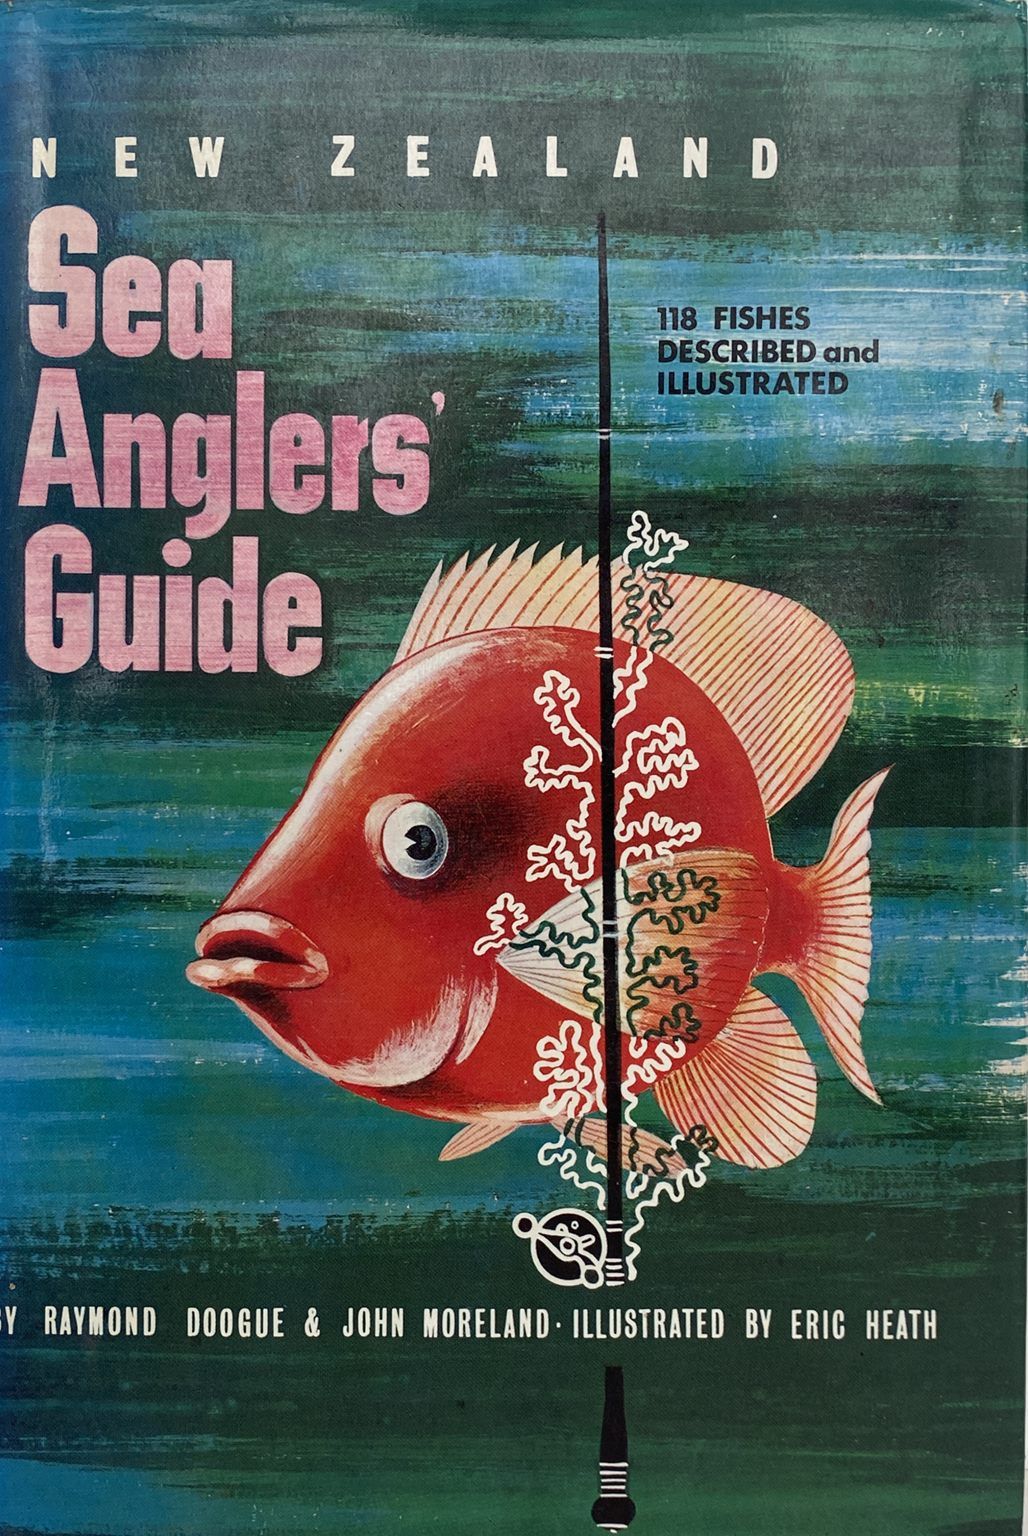 NEW ZEALAND SEA ANGLERS GUIDE - 118 Fishes describes and illustrated